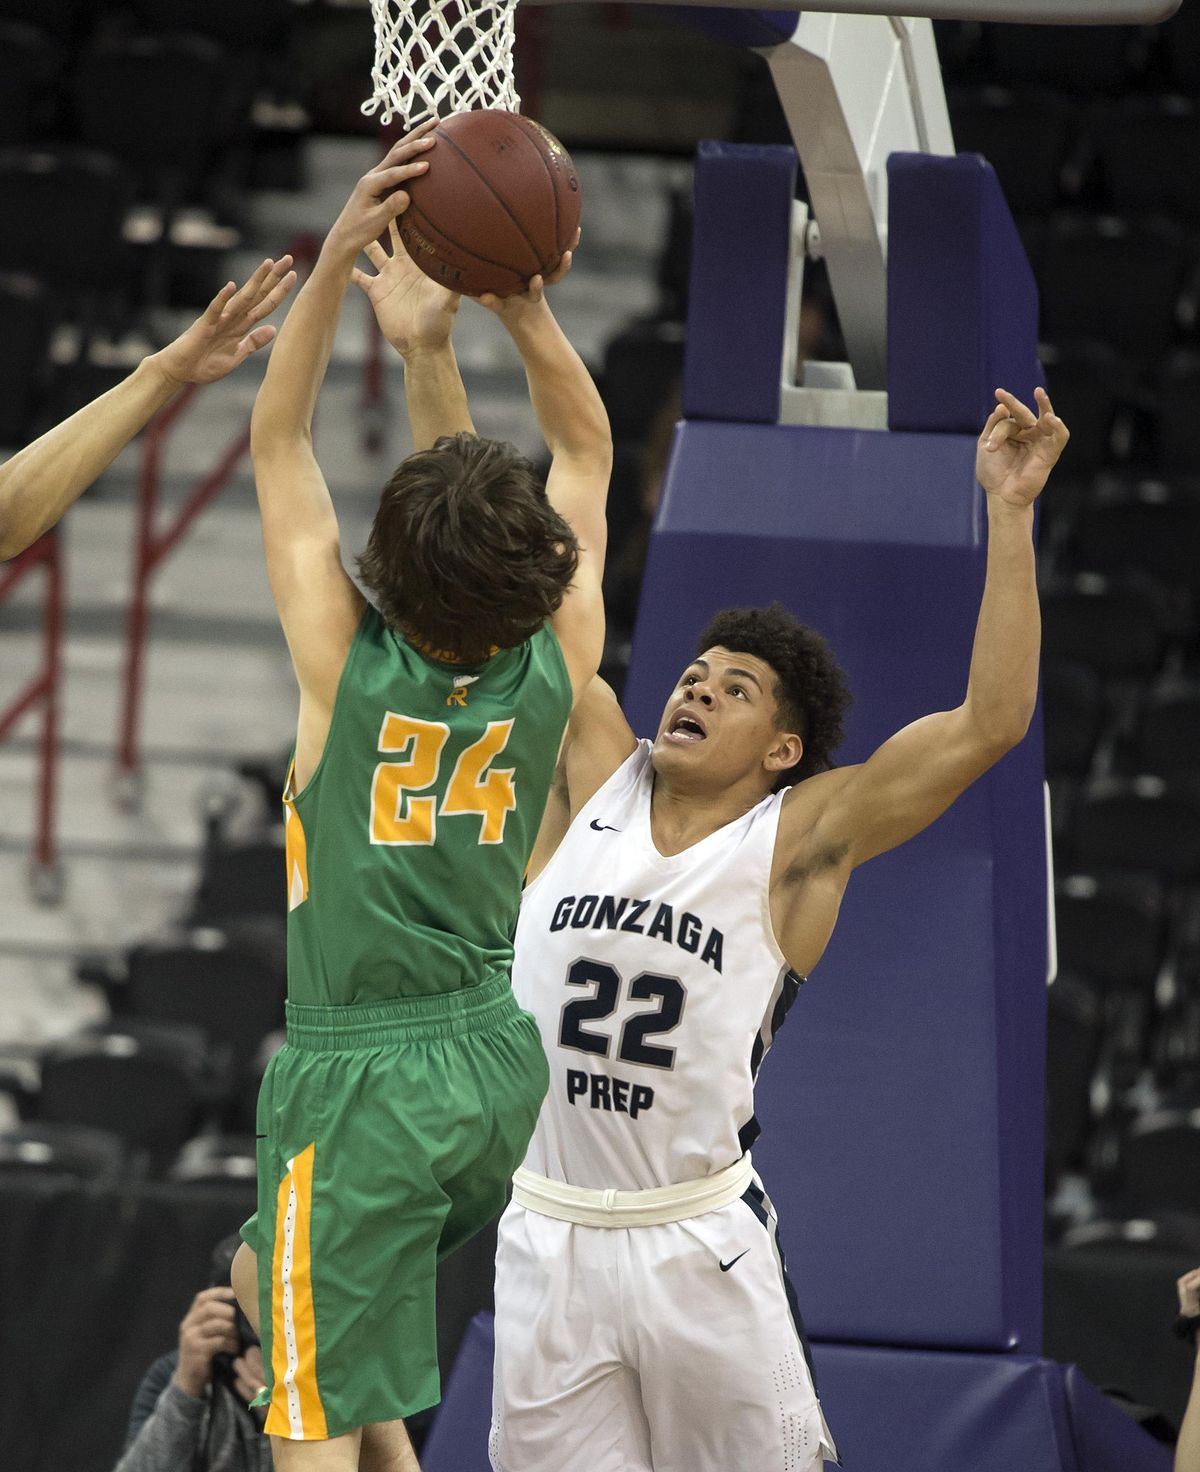 Gonzaga Prep guard Sam Lockett (22) tries to stop a shot by Richland’s Cole Northrop (24) during a District 4A title basketball game, Friday, Feb. 16, 2018, in the Spokane Arena. (Colin Mulvany / The Spokesman-Review)